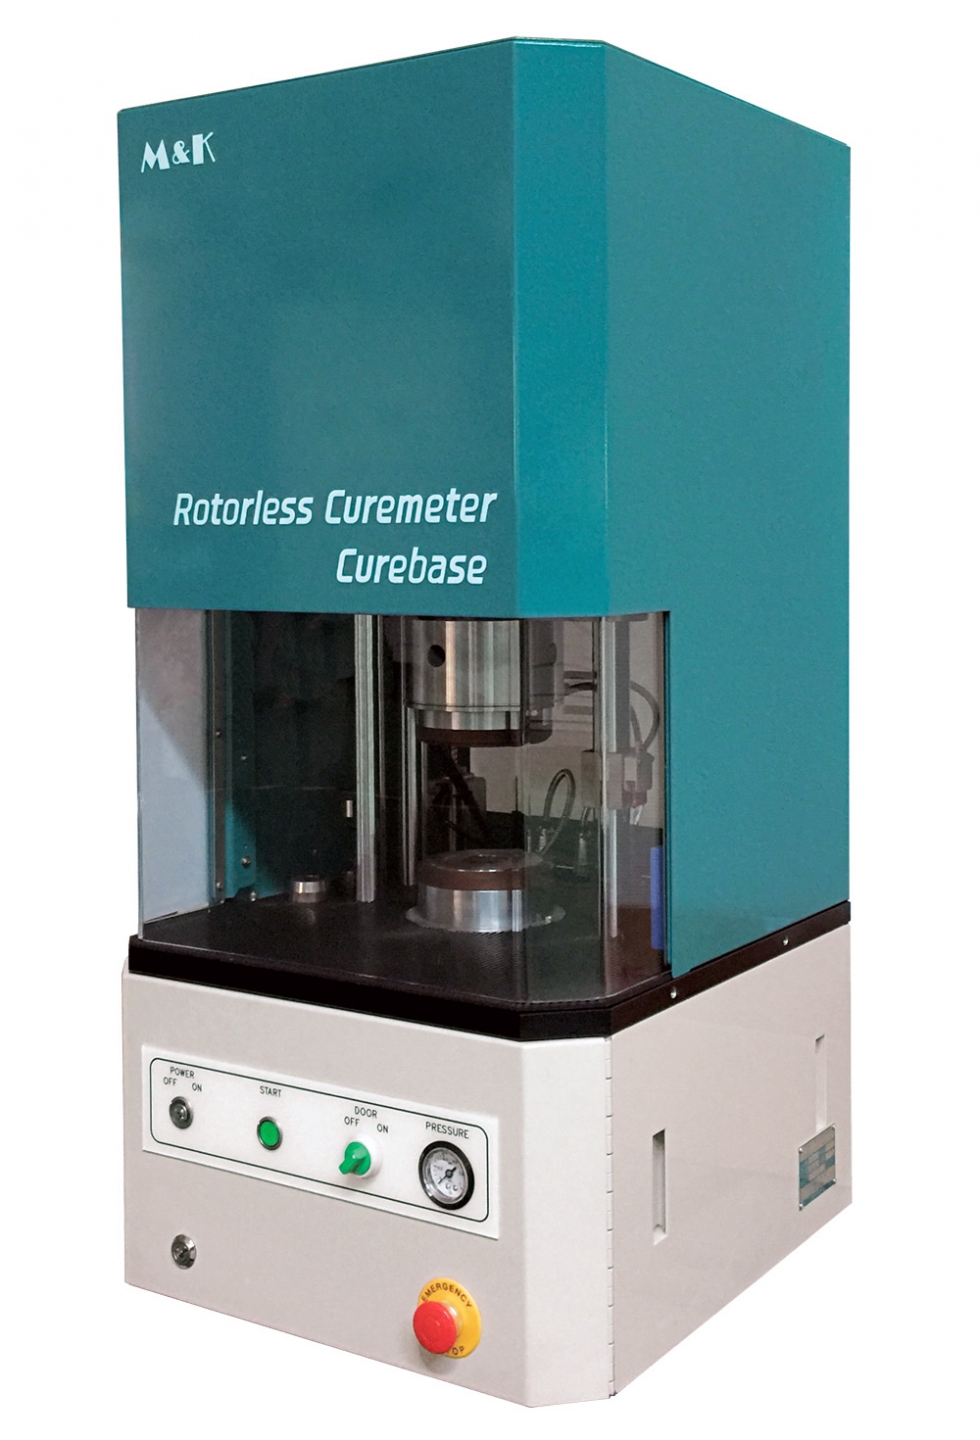 Rotorless Curemeter for Rubber　Curebase